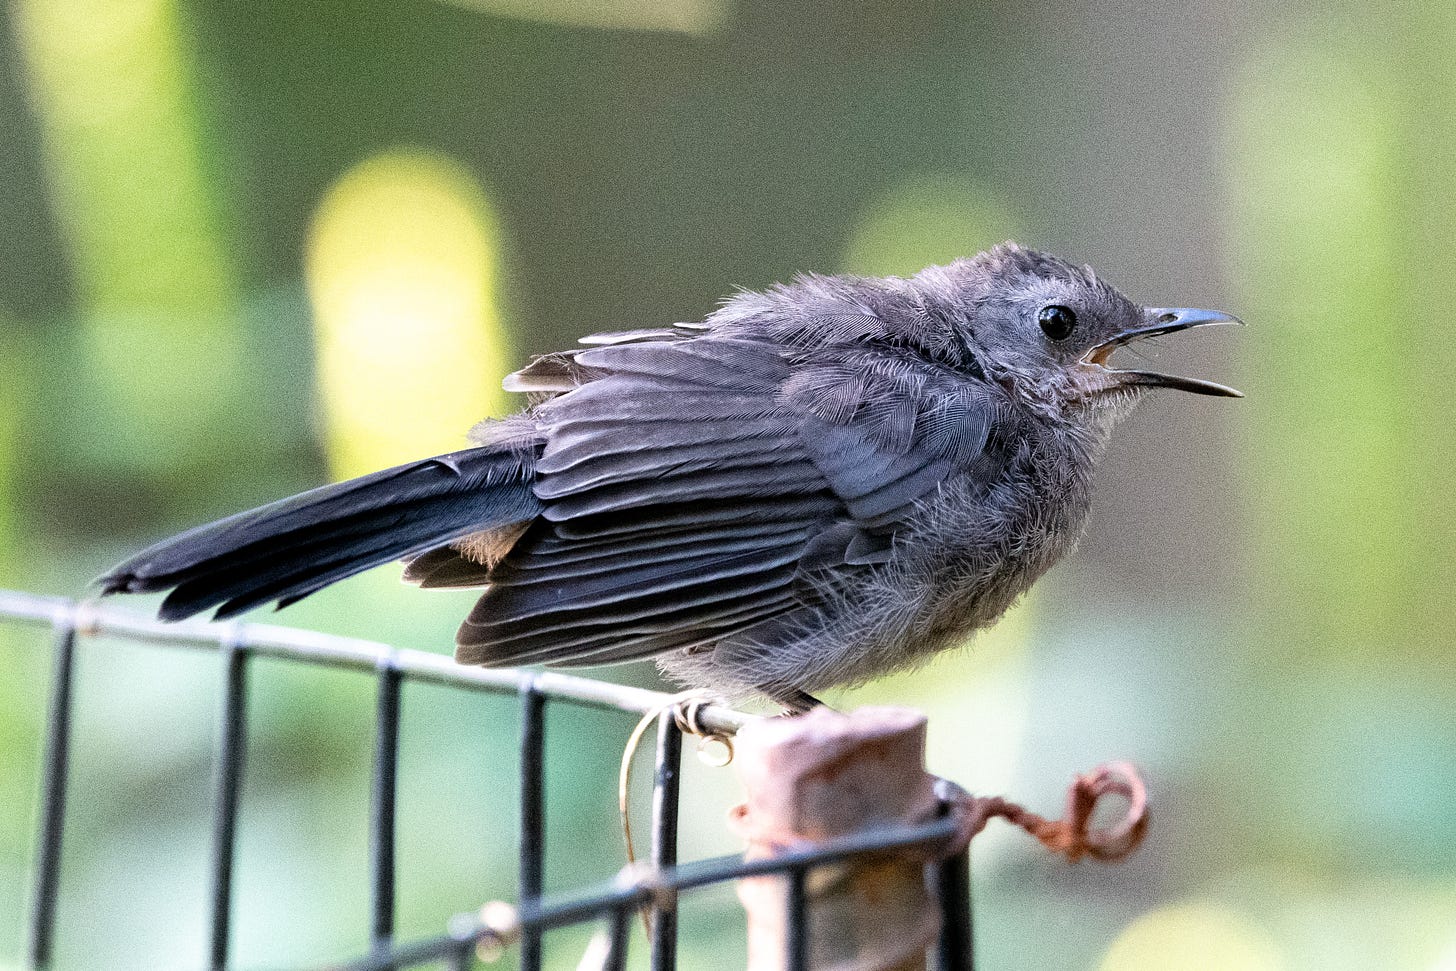 A disheveled-looking gray bird with a black cap is perched on a corner of a fence, its beak open as it vocalizes